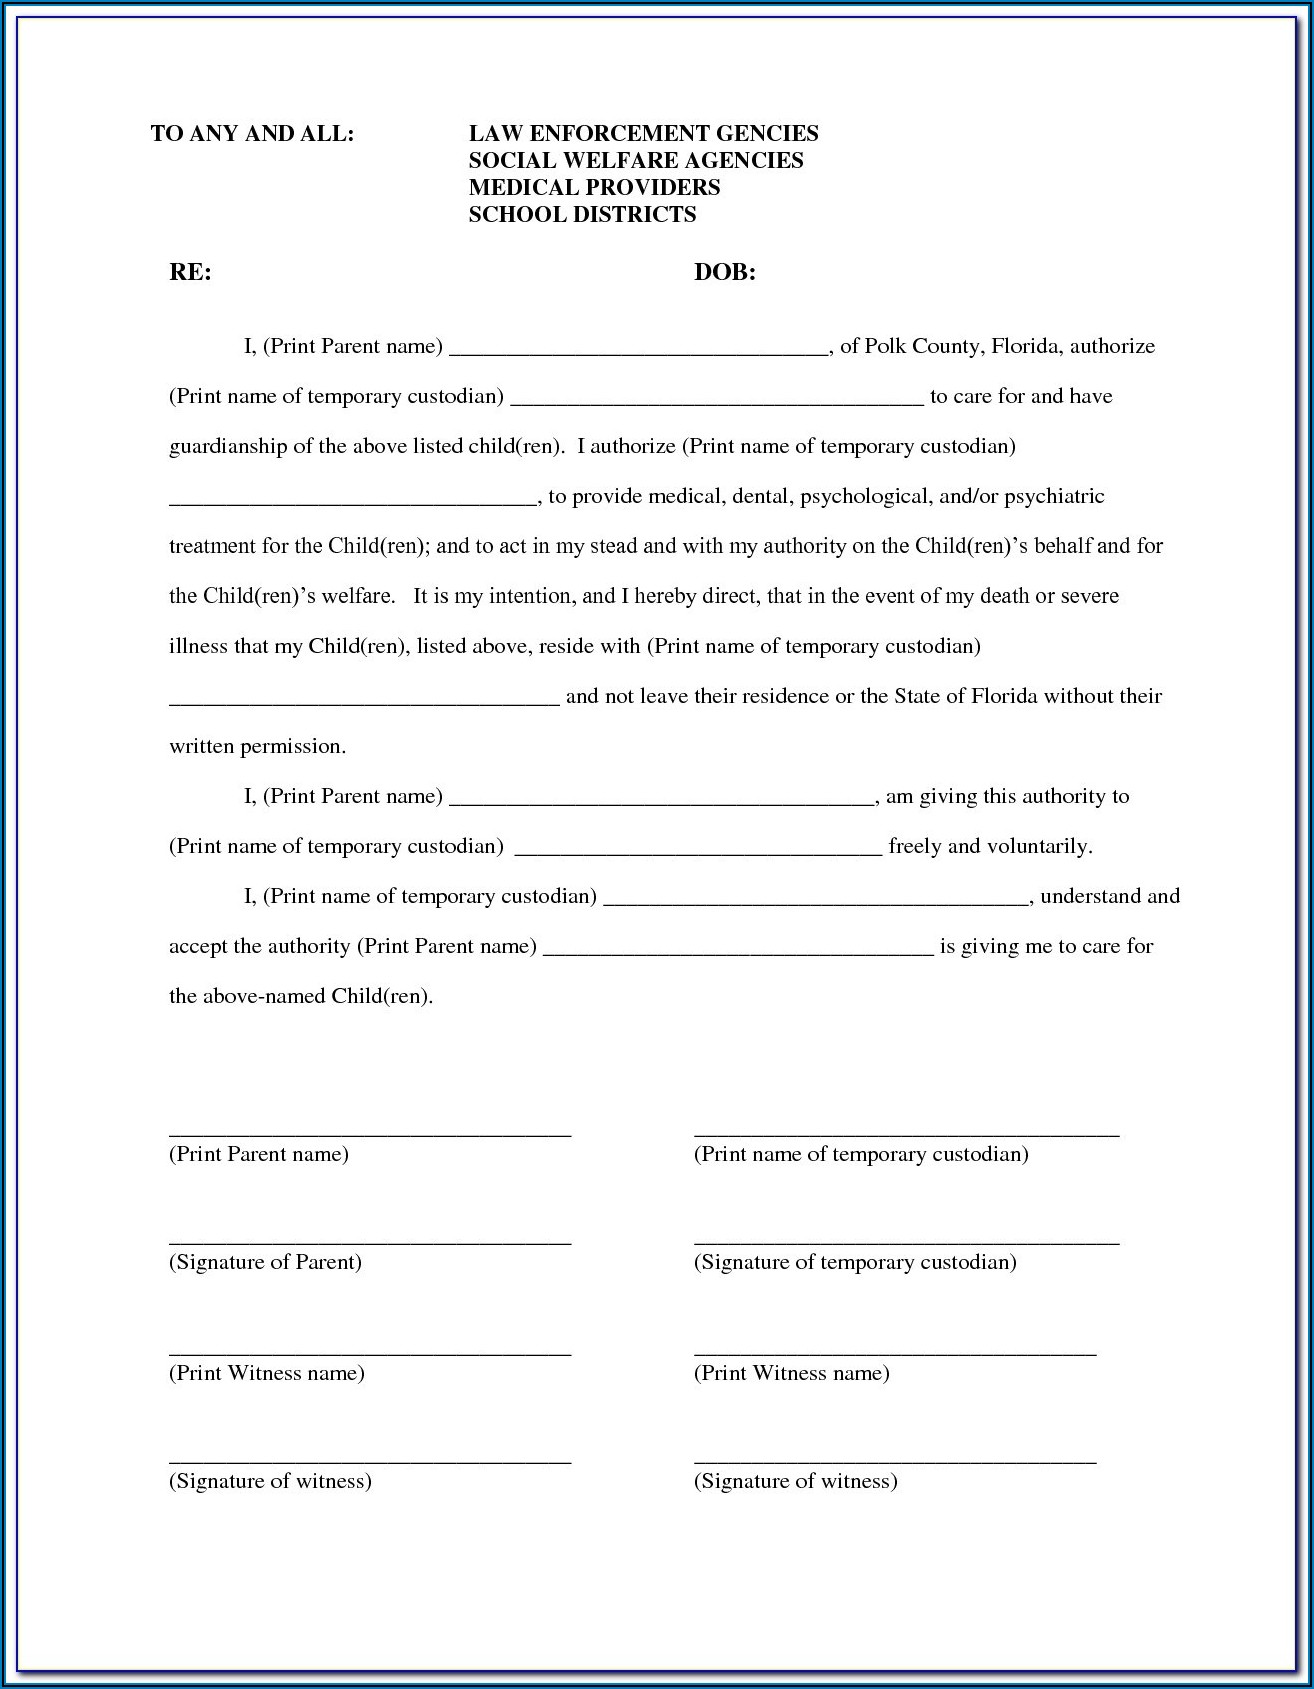 Example Of Temporary Guardianship Form